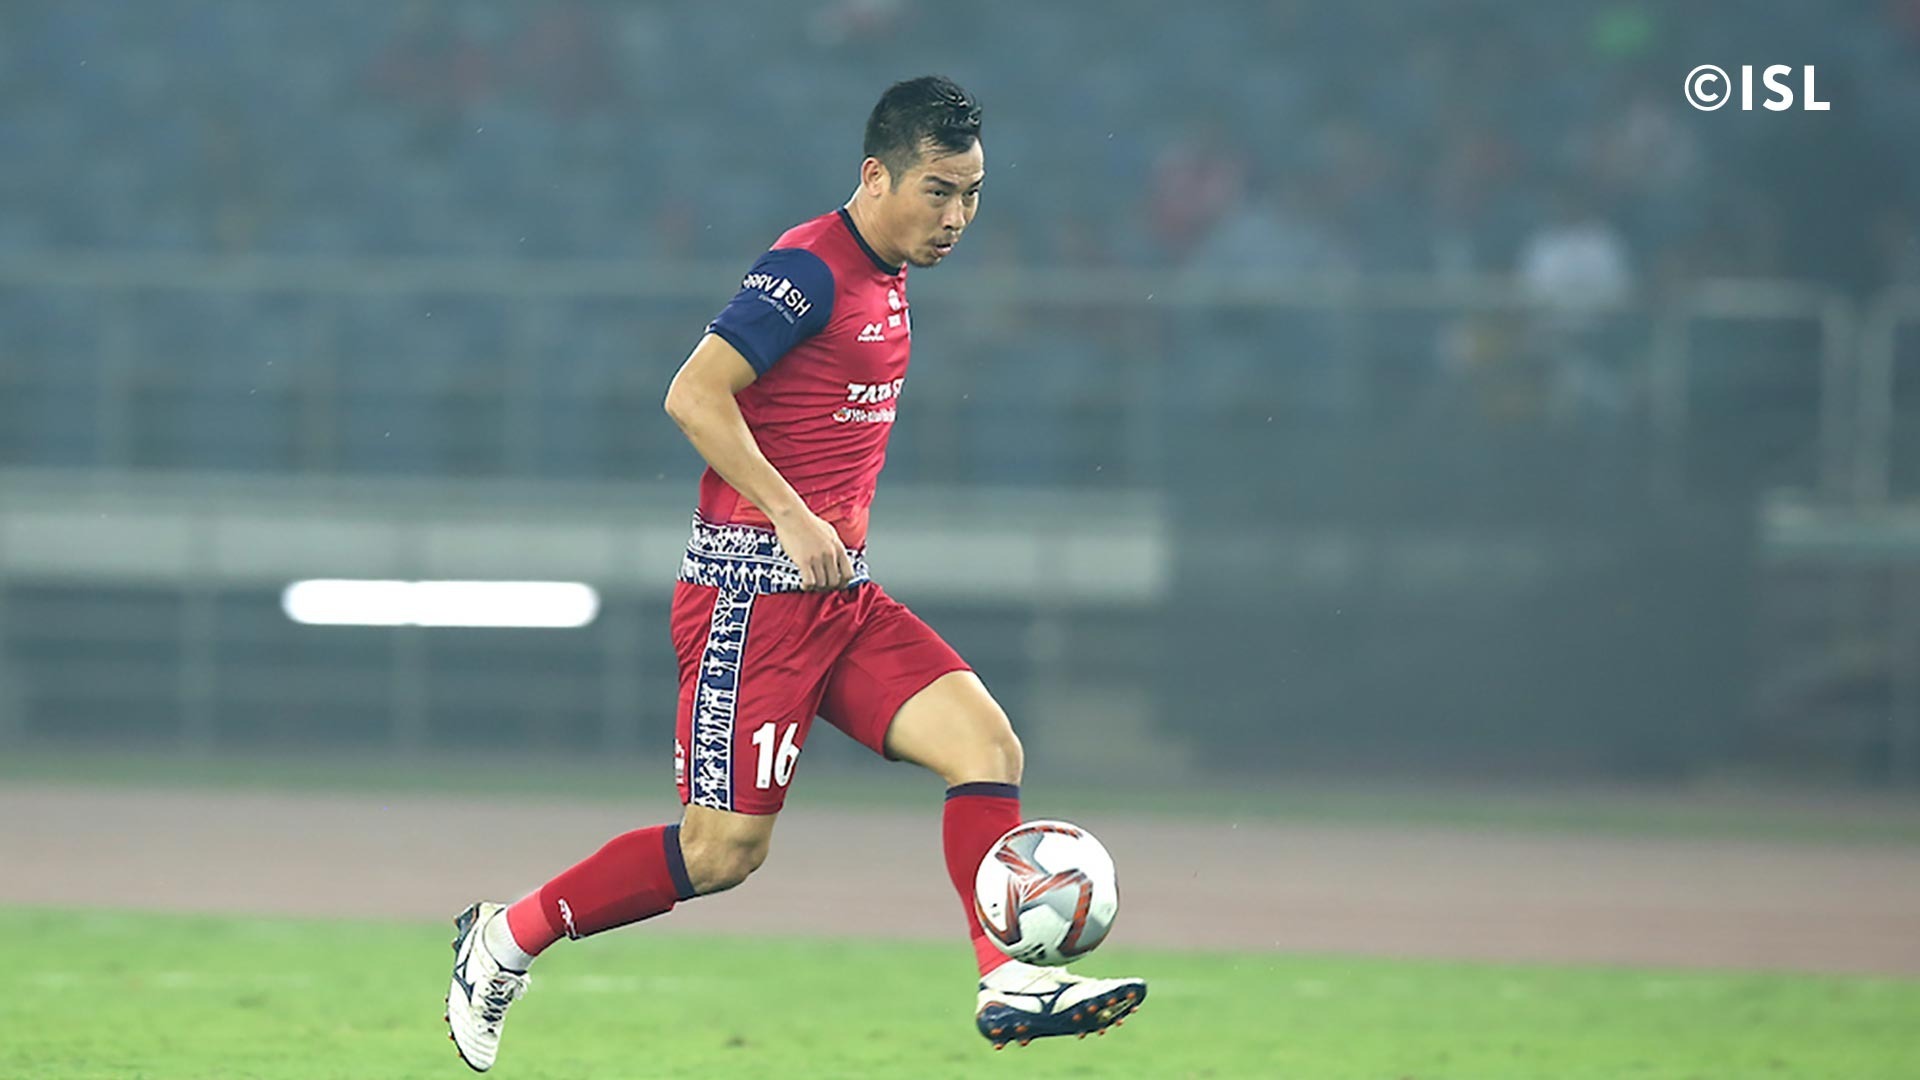 ISL 2019 | Robin Gurung to play for Jamshedpur FC after contract extension